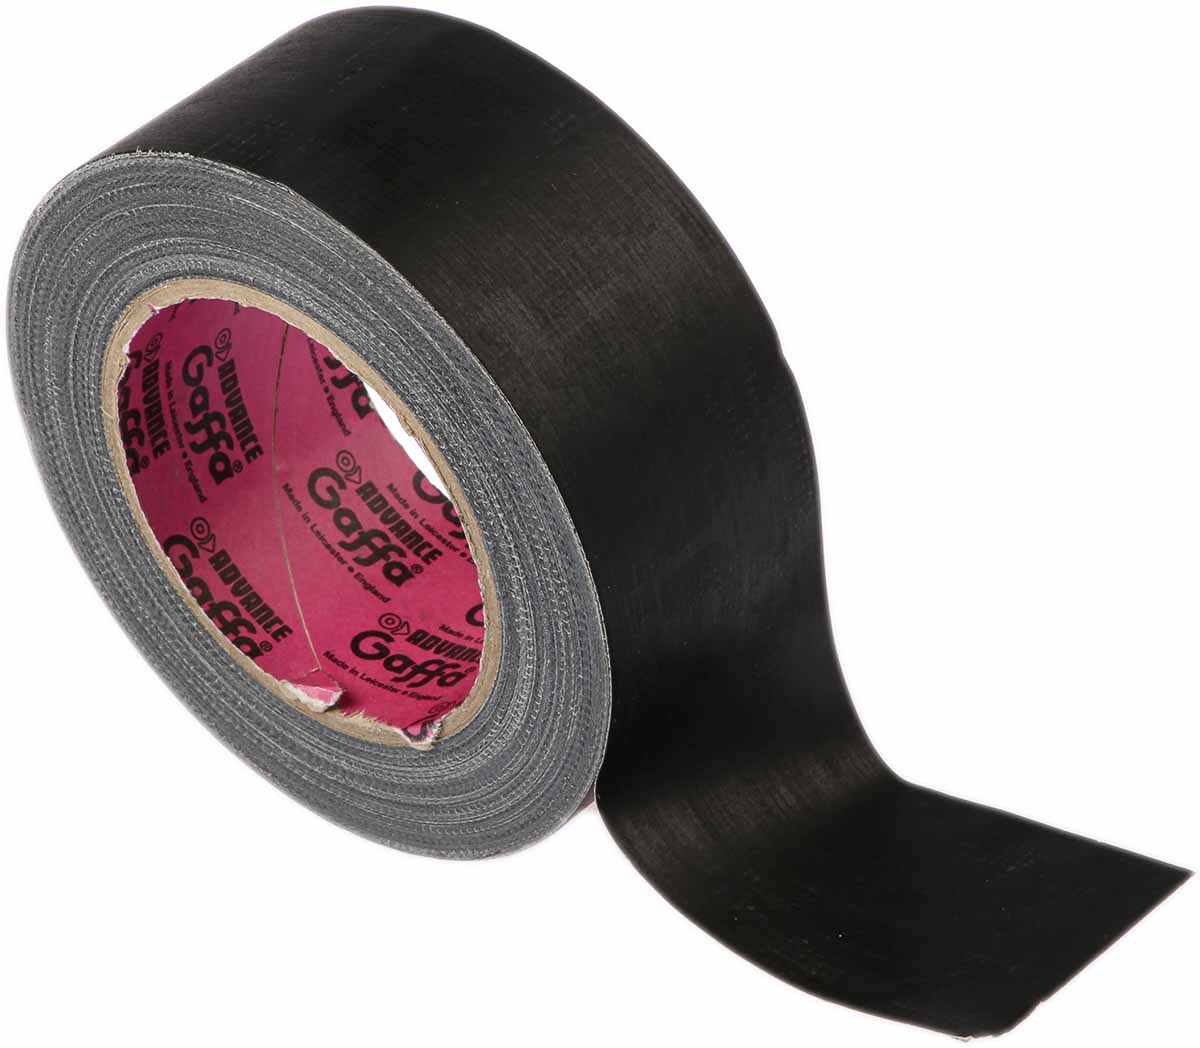 Duct Tape vs Gaffer's Tape Difference